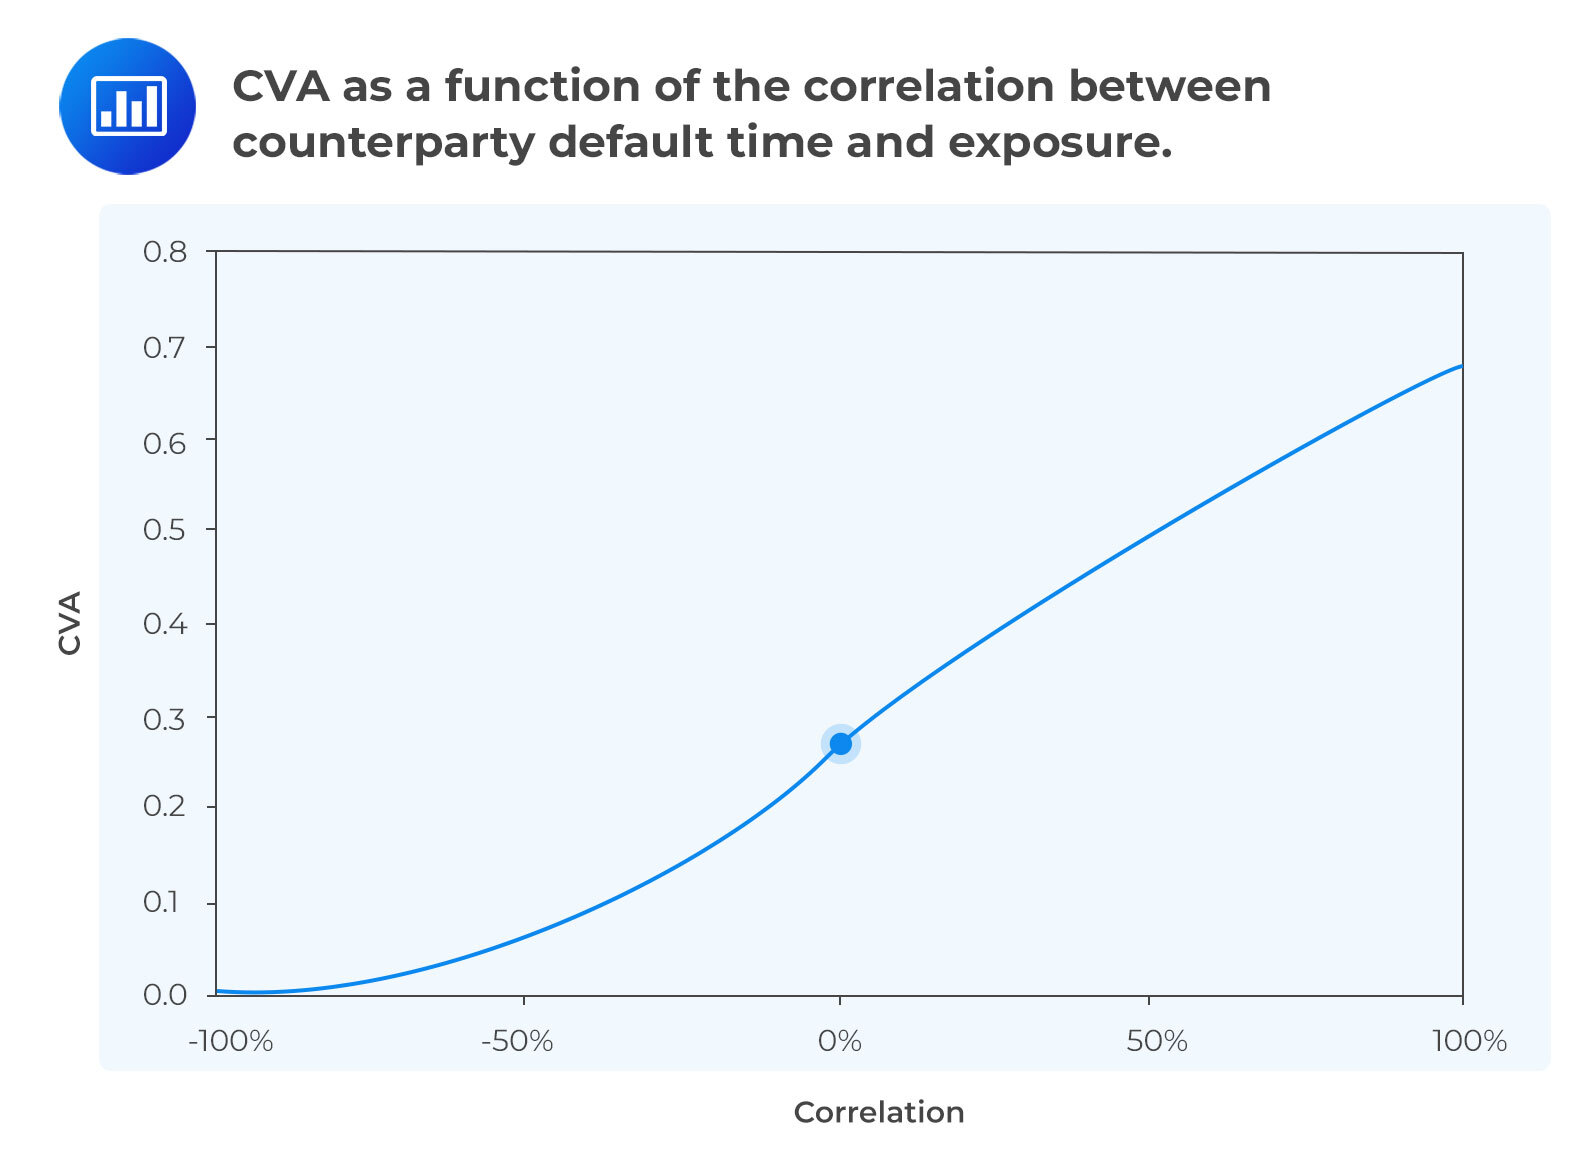 CVA as a function of the correlation between counterparty default time and exposure. The point marked shows the standard CVA (0% correlation)